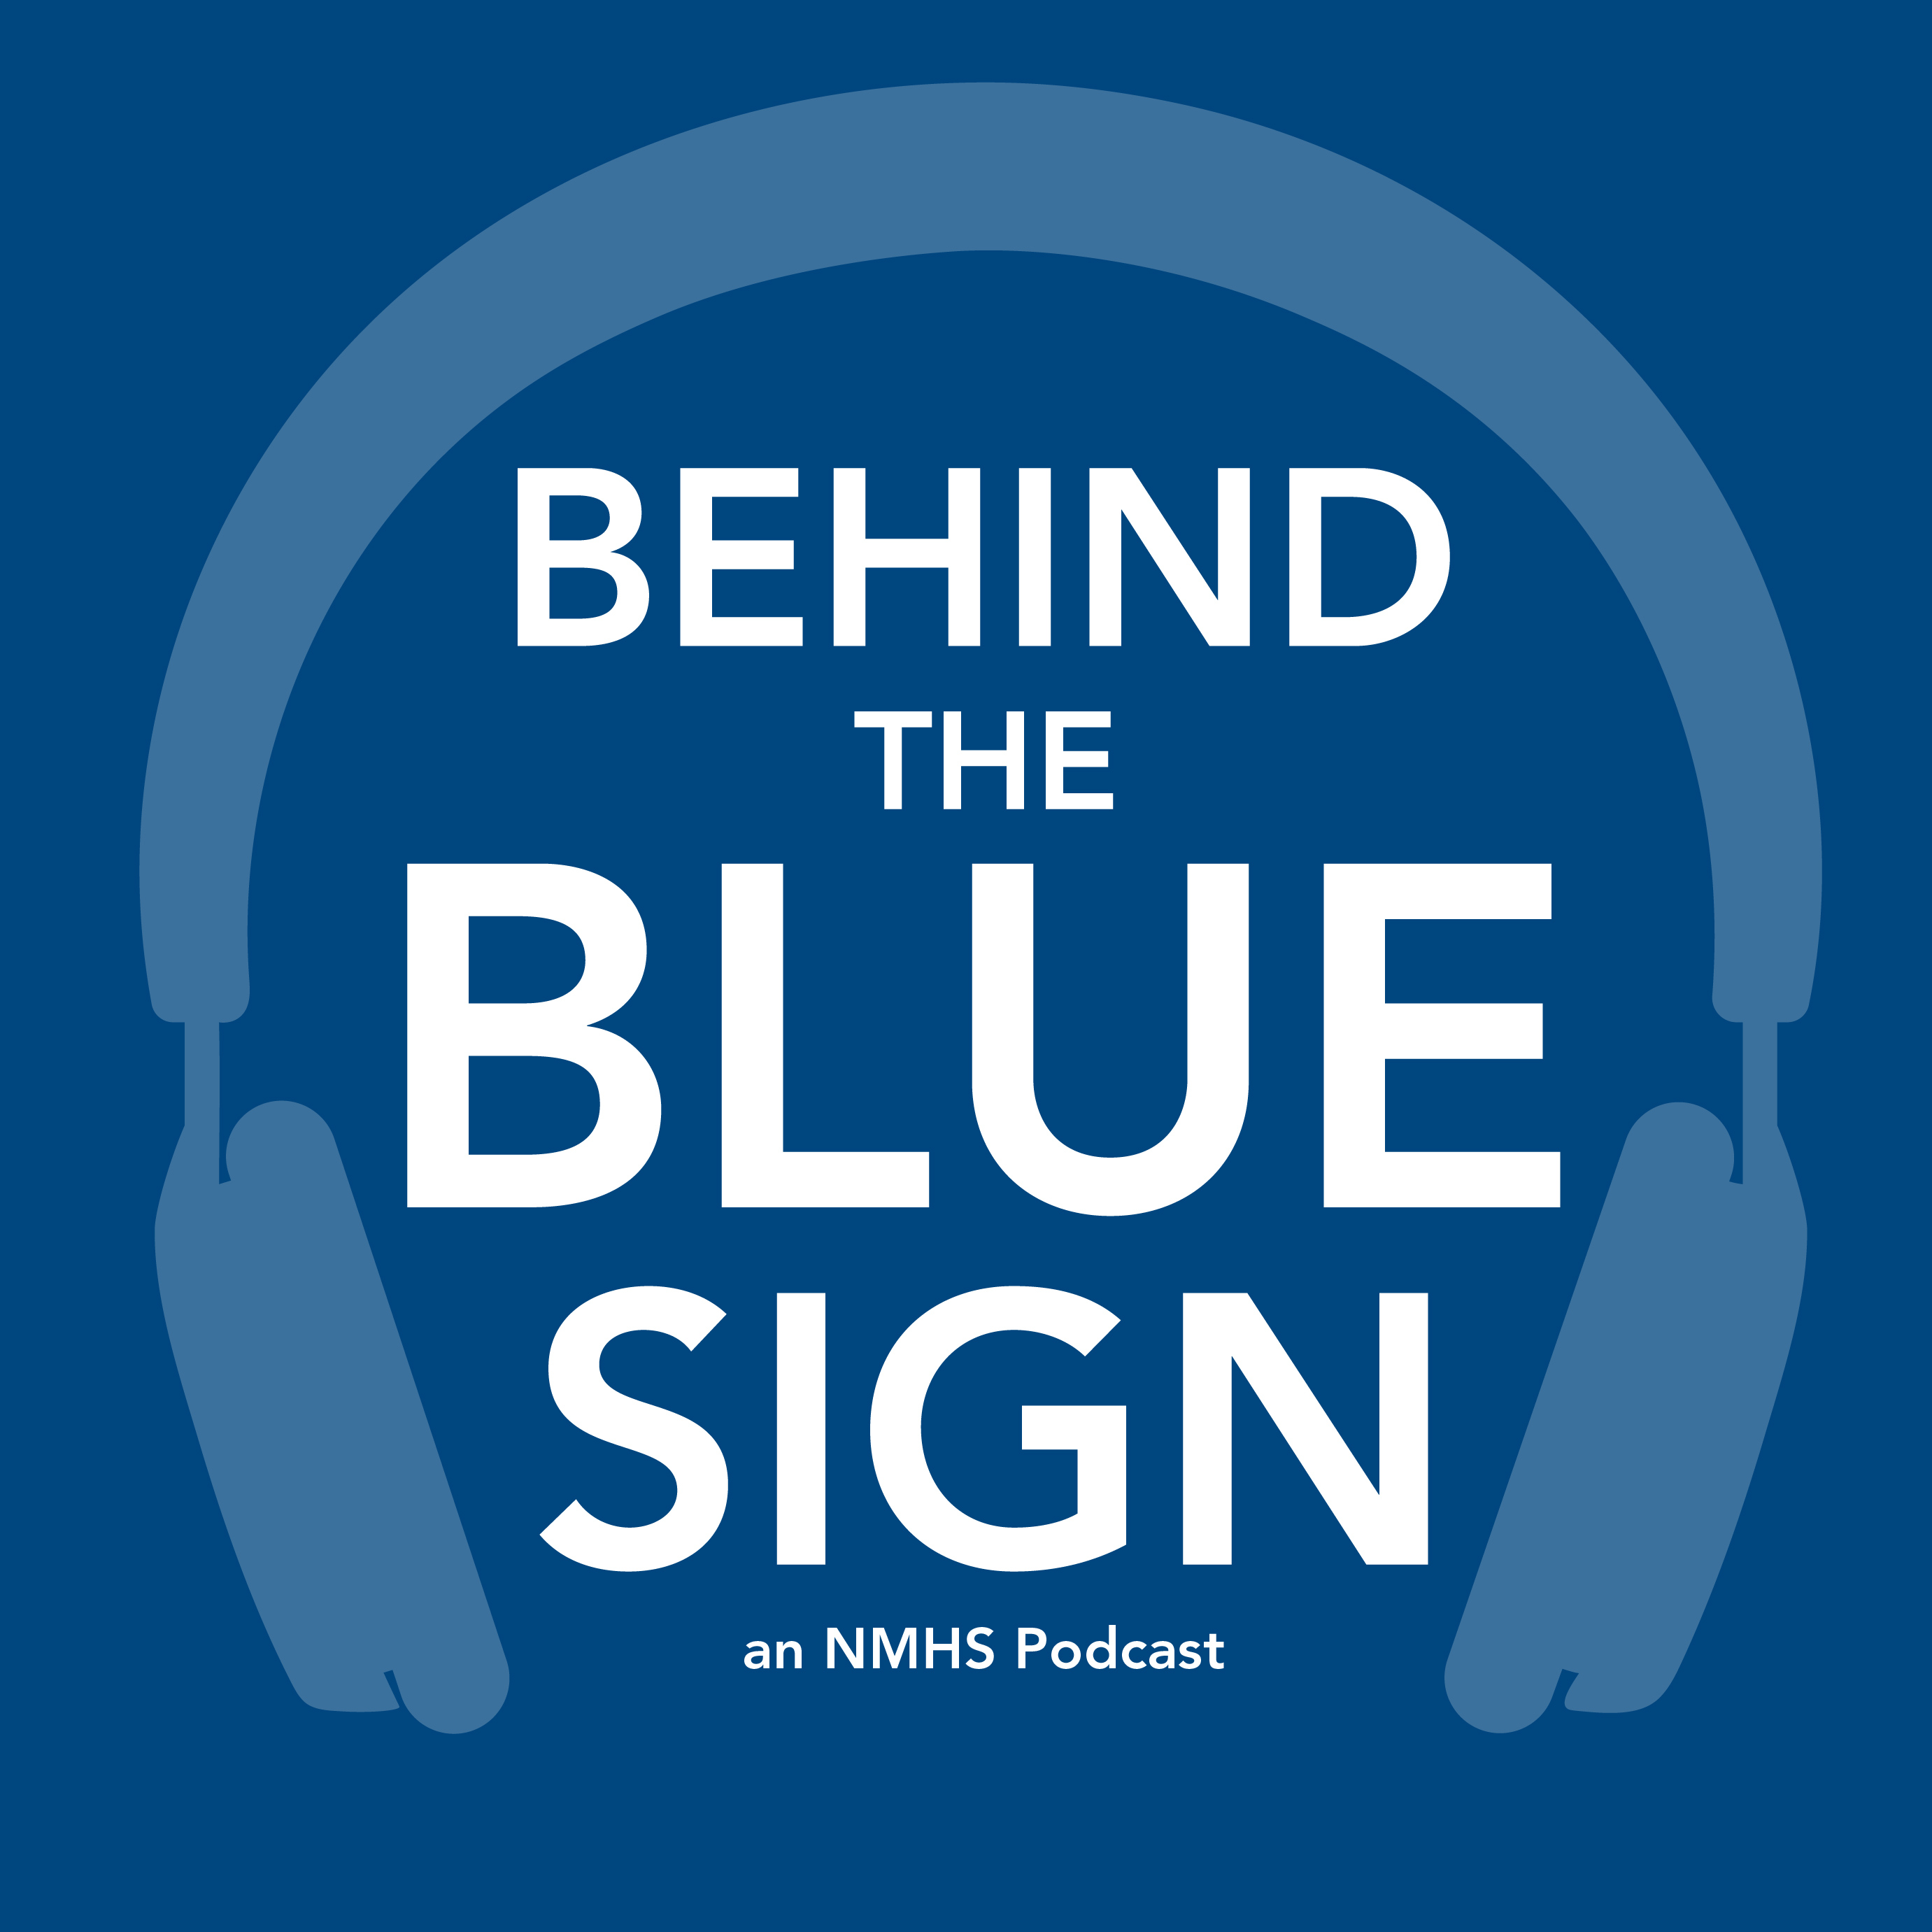 Behind The Blue Sign - An NMHS Podcast